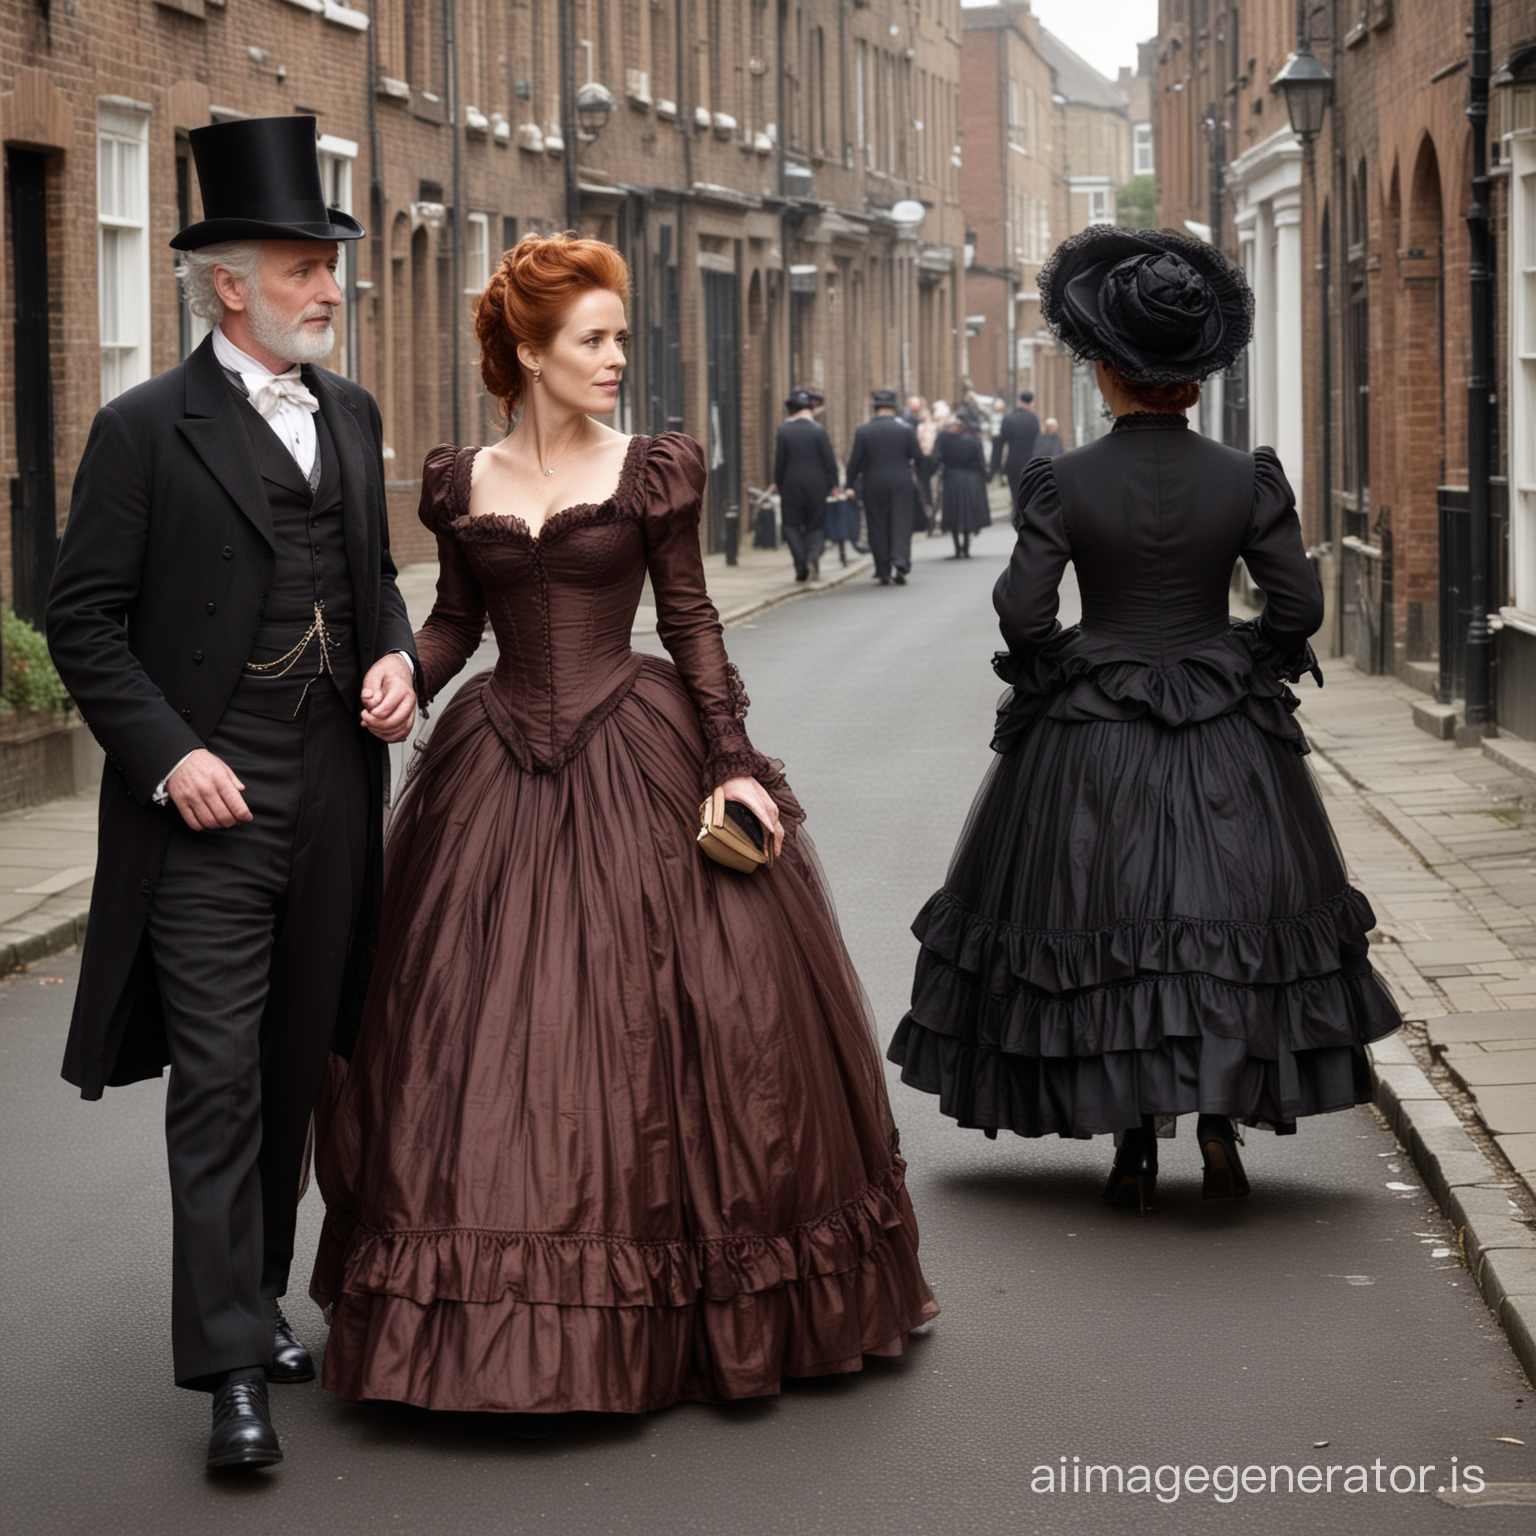 red hair Gillian Anderson wearing a dark chocolate floor-length loose billowing 1860 Victorian crinoline poofy dress with a frilly bonnet on Victorian era street with an old man dressed into a black Victorian suit who seems to be her dear husband 
